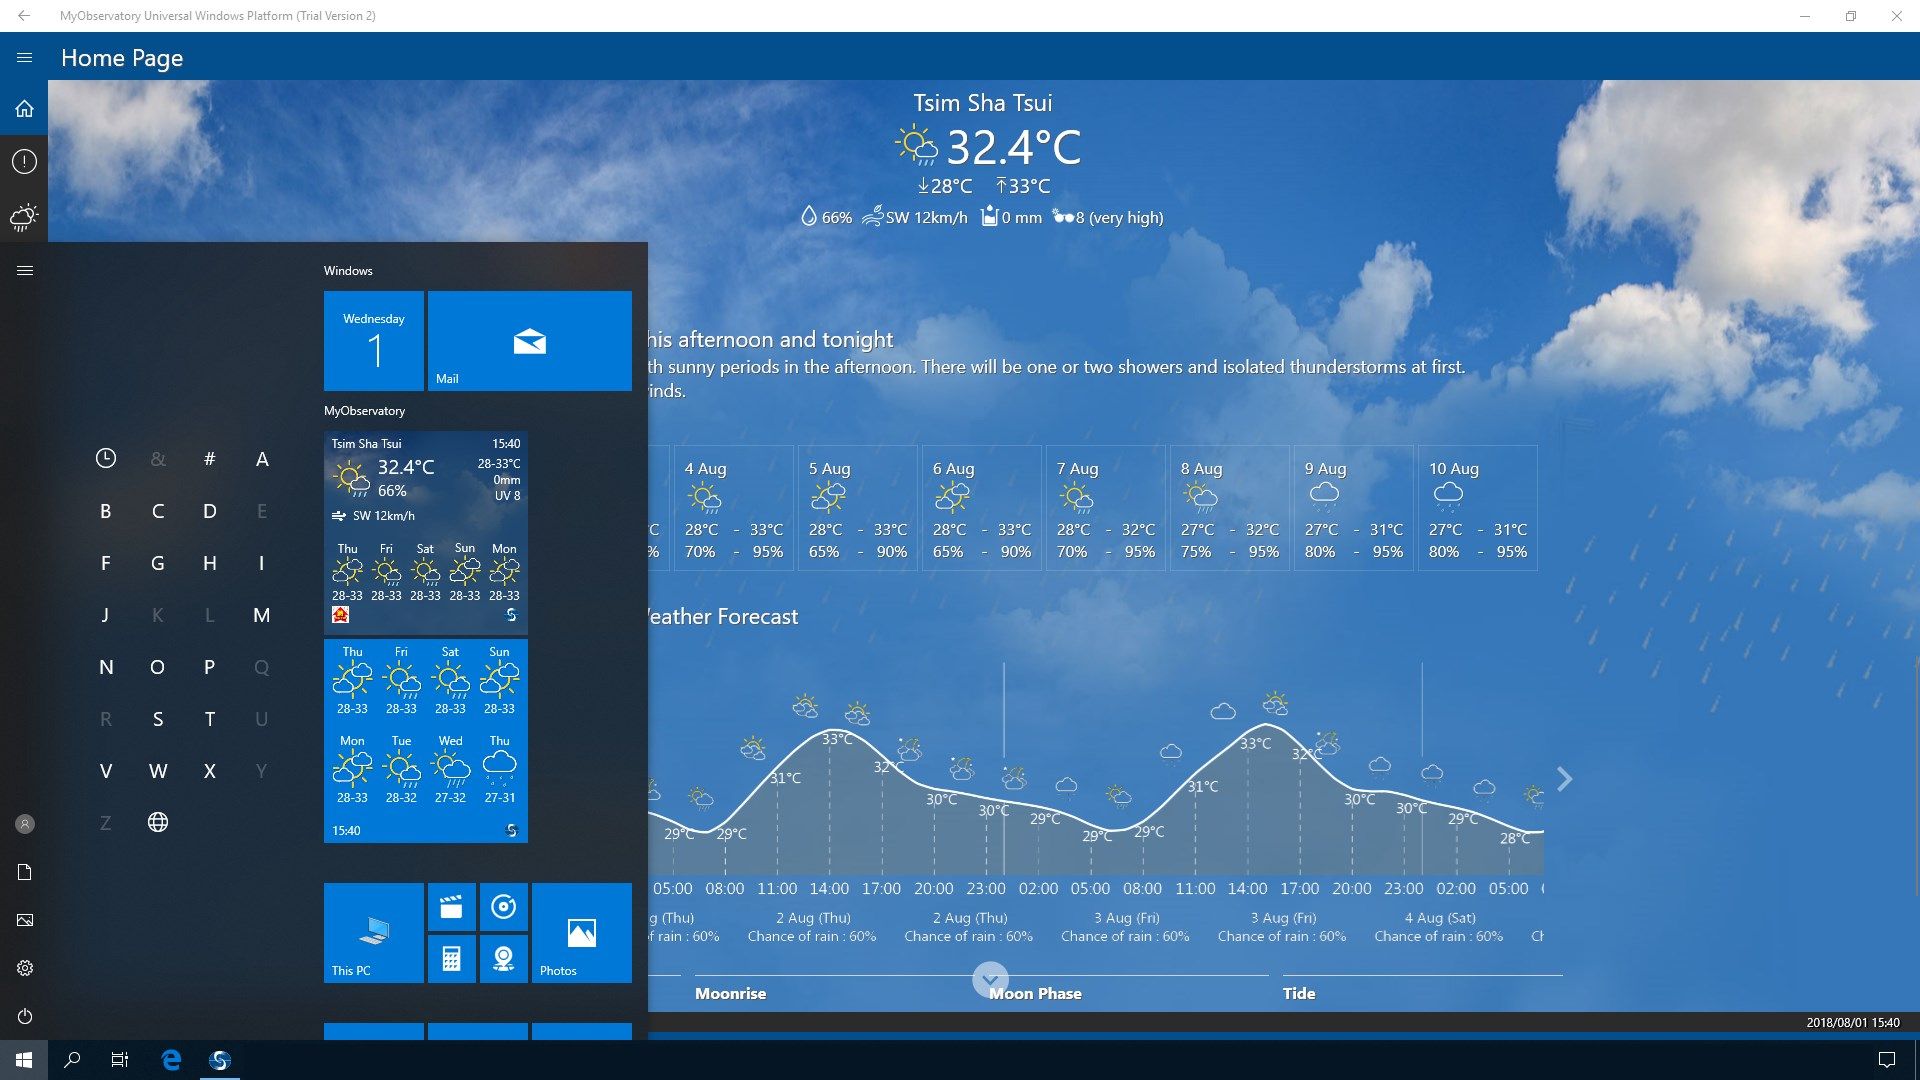 Live tile with current weather and warnings